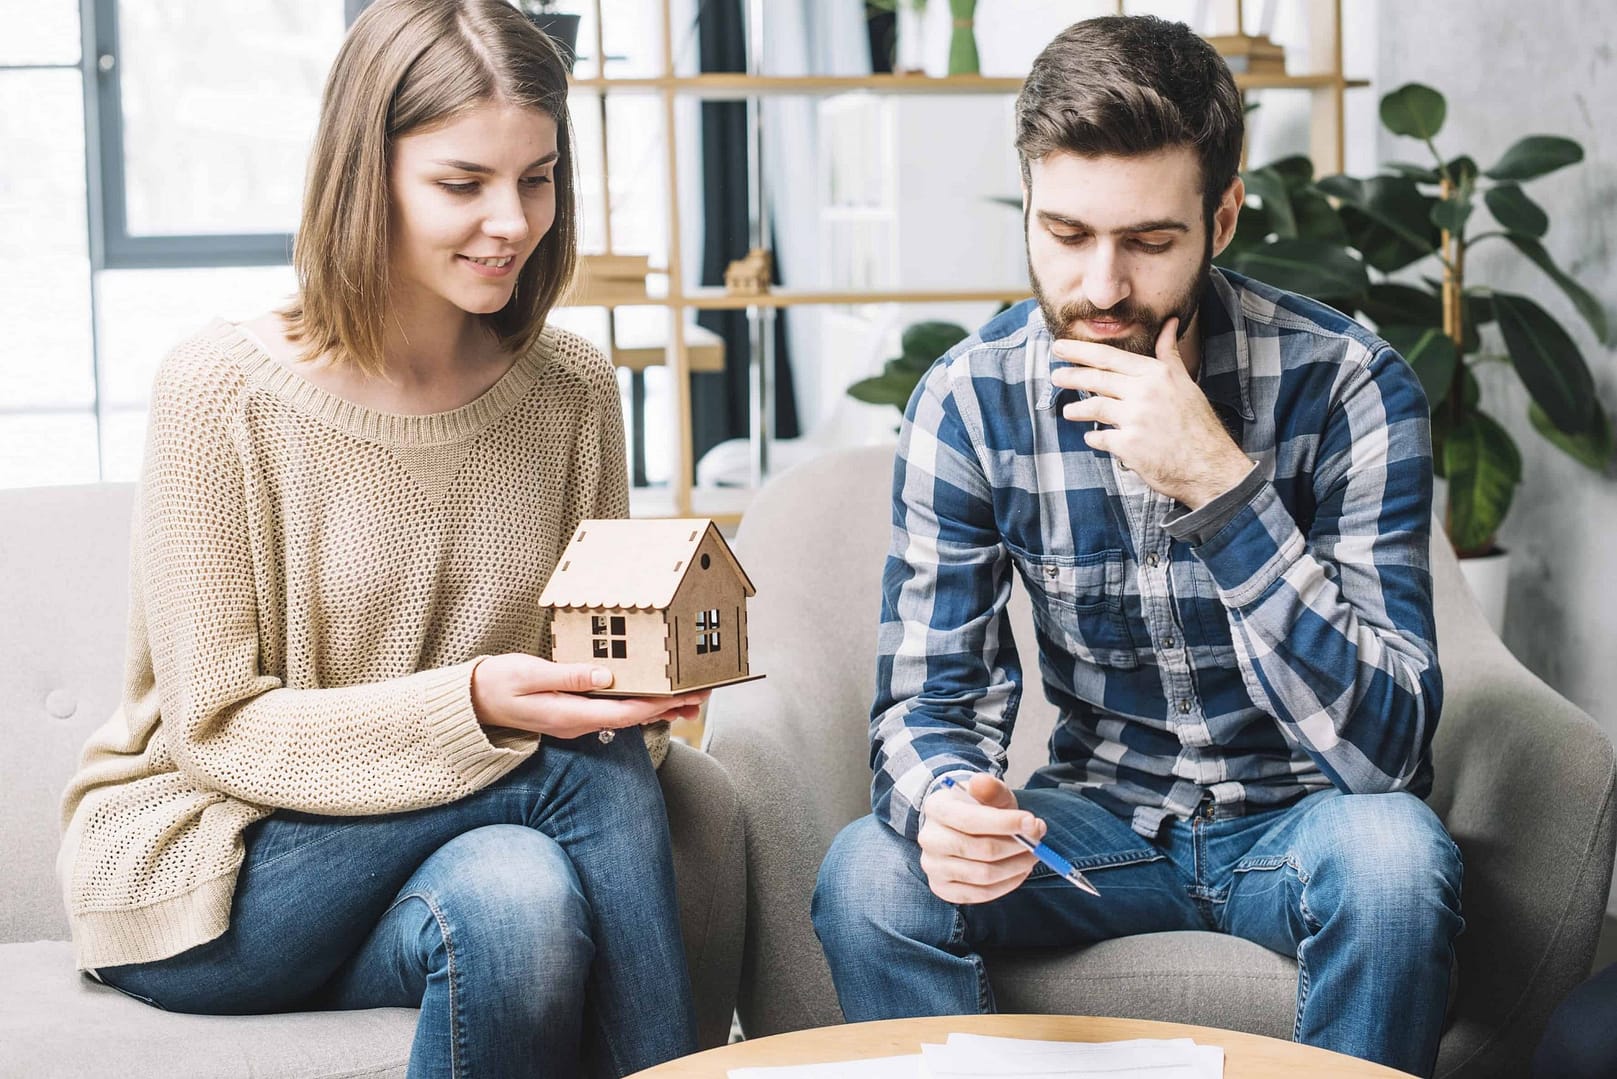 Is renting a house without a buy-to-let mortgage illegal